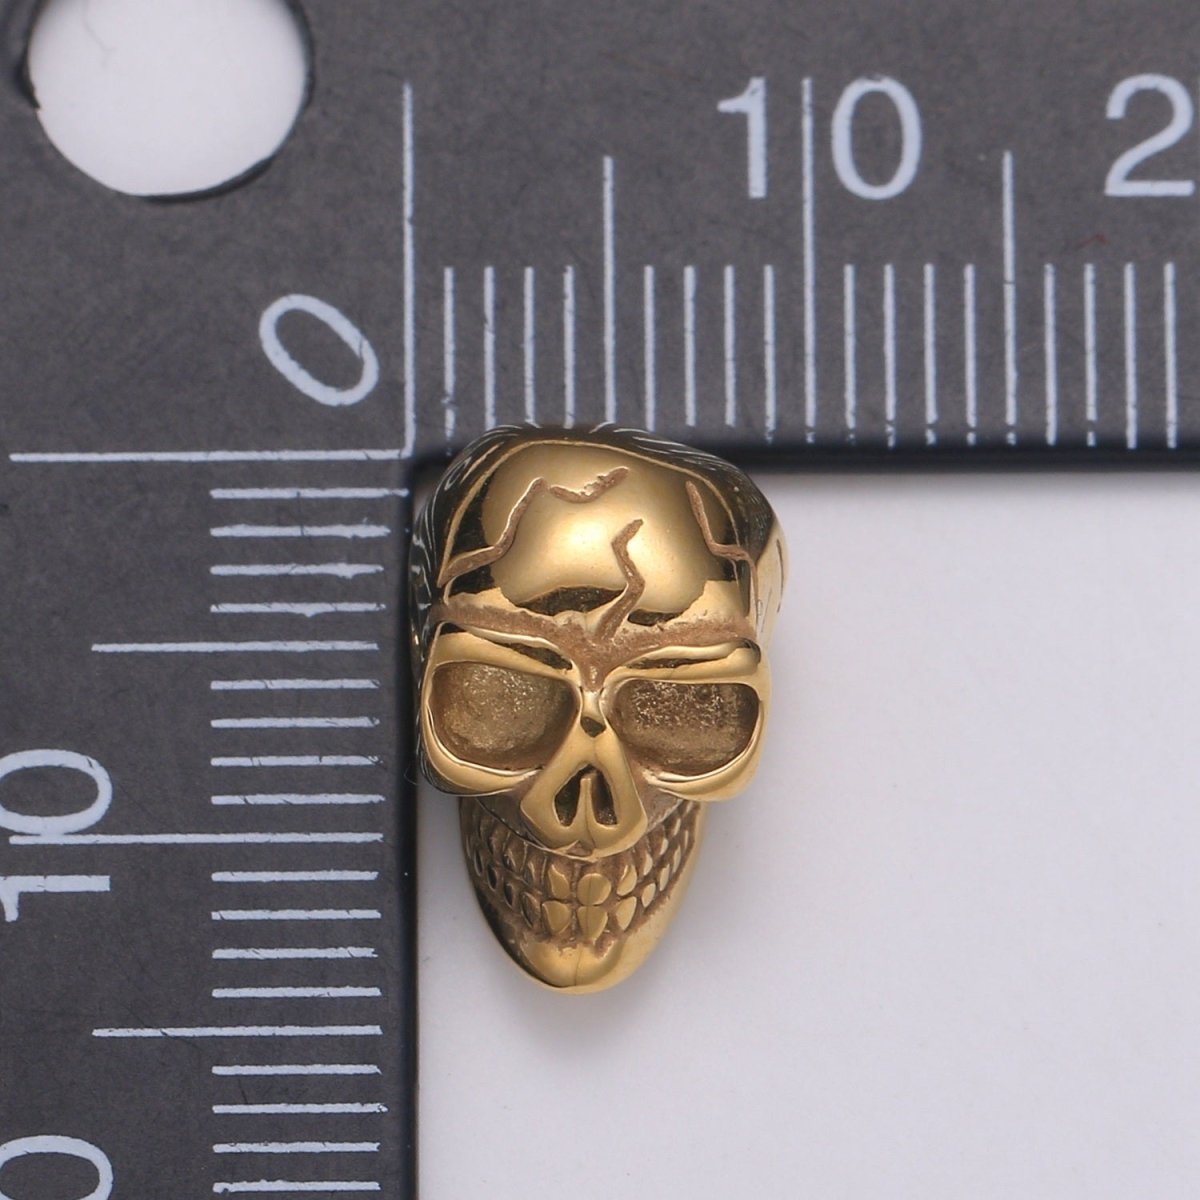 Gold Stainless Steel 3D Skull Head Bead Scary, Halloween Season, Bracelet Charm Bead Finding Connector Spacer for Jewelry Making B-453 - DLUXCA